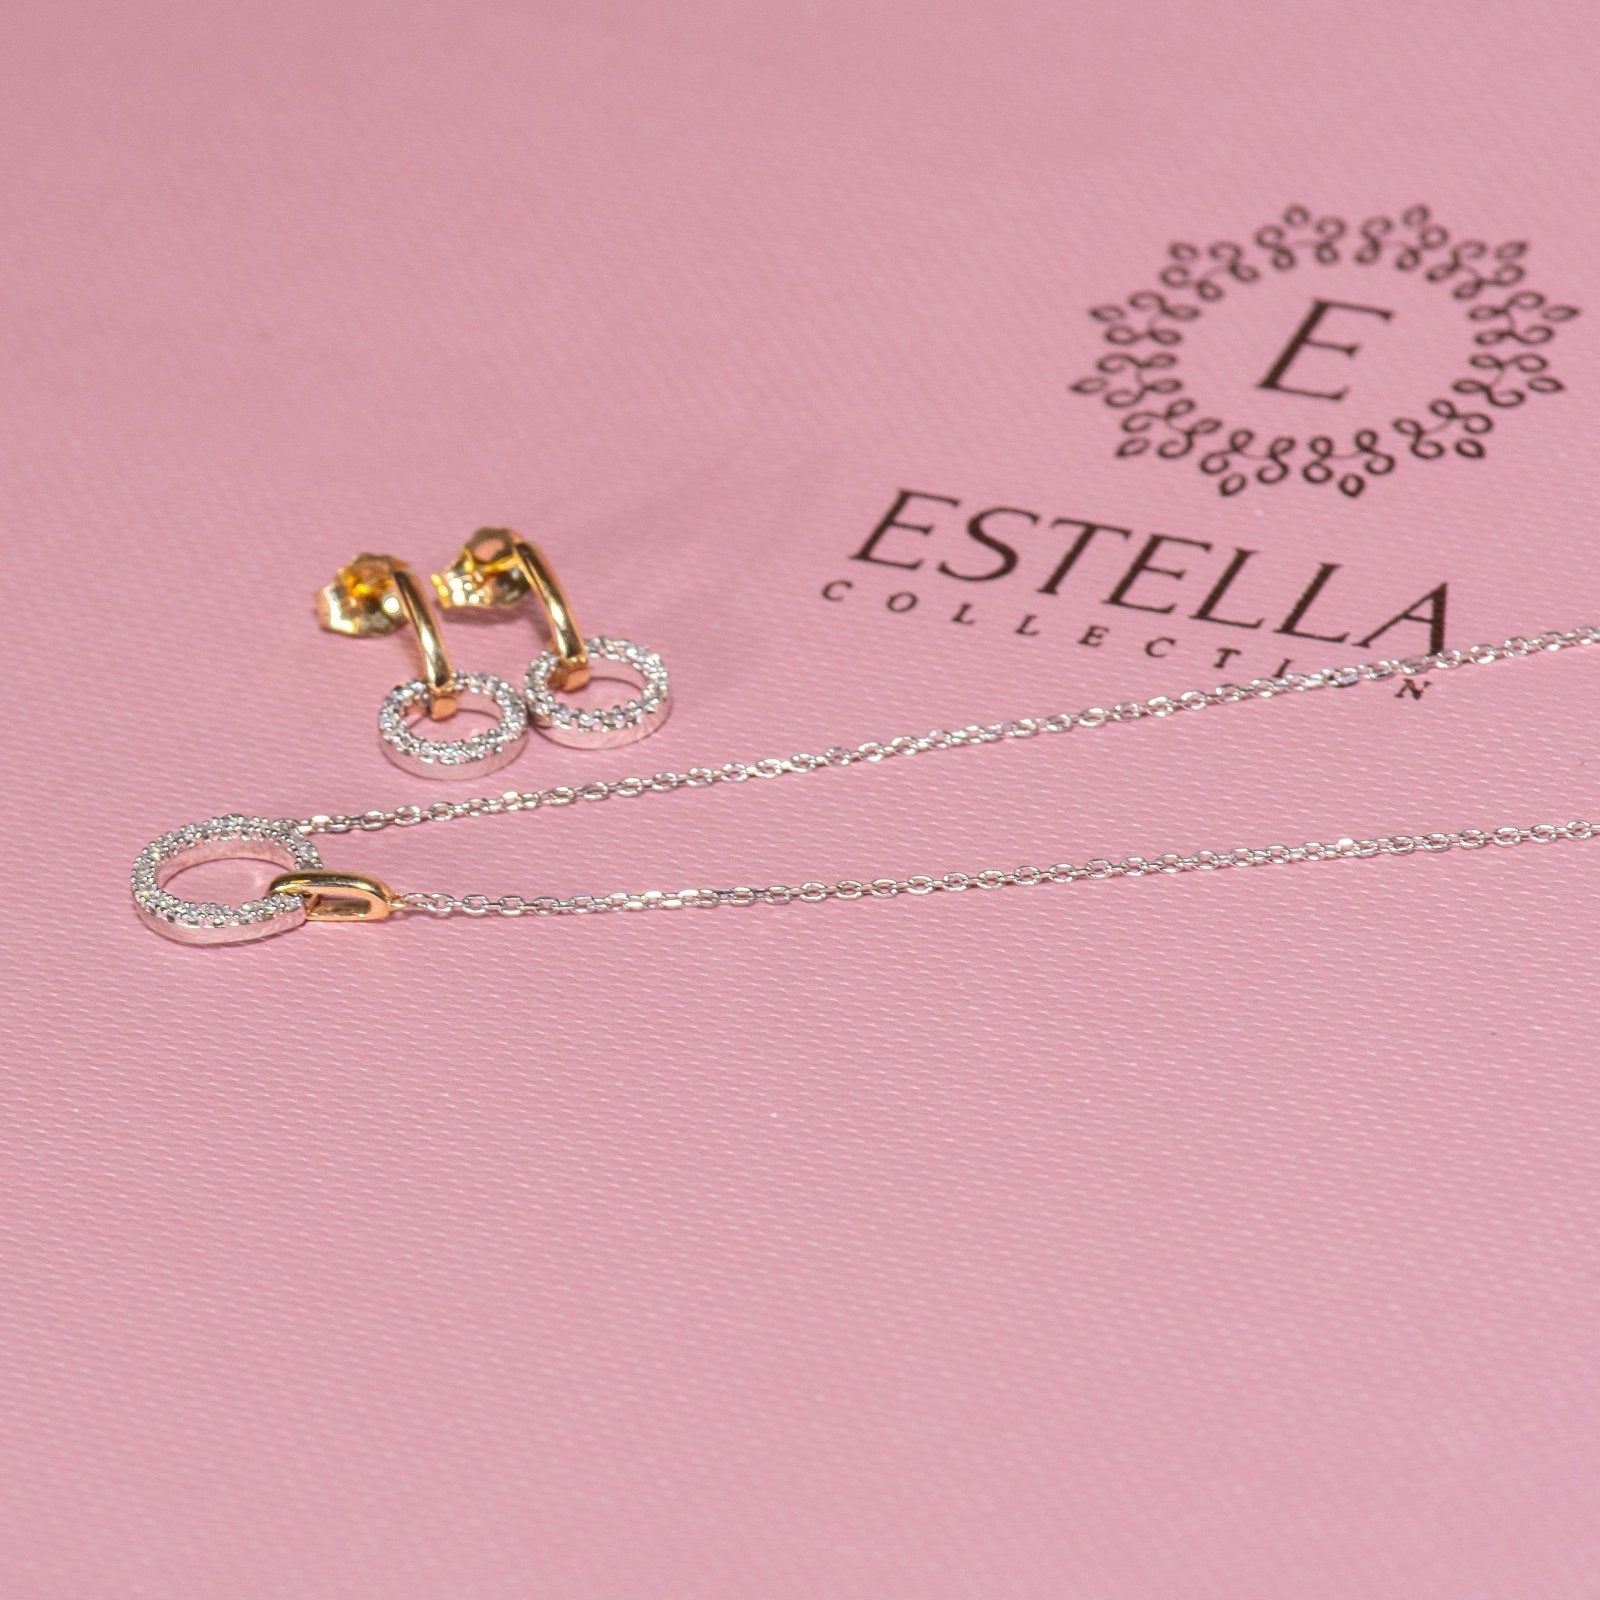 Interlocking Diamond and Gold Circle Necklace Necklaces Estella Collection 32687 925 Diamond Sterling Silver #tag4# #tag5# #tag6# #tag7# #tag8# #tag9# #tag10#